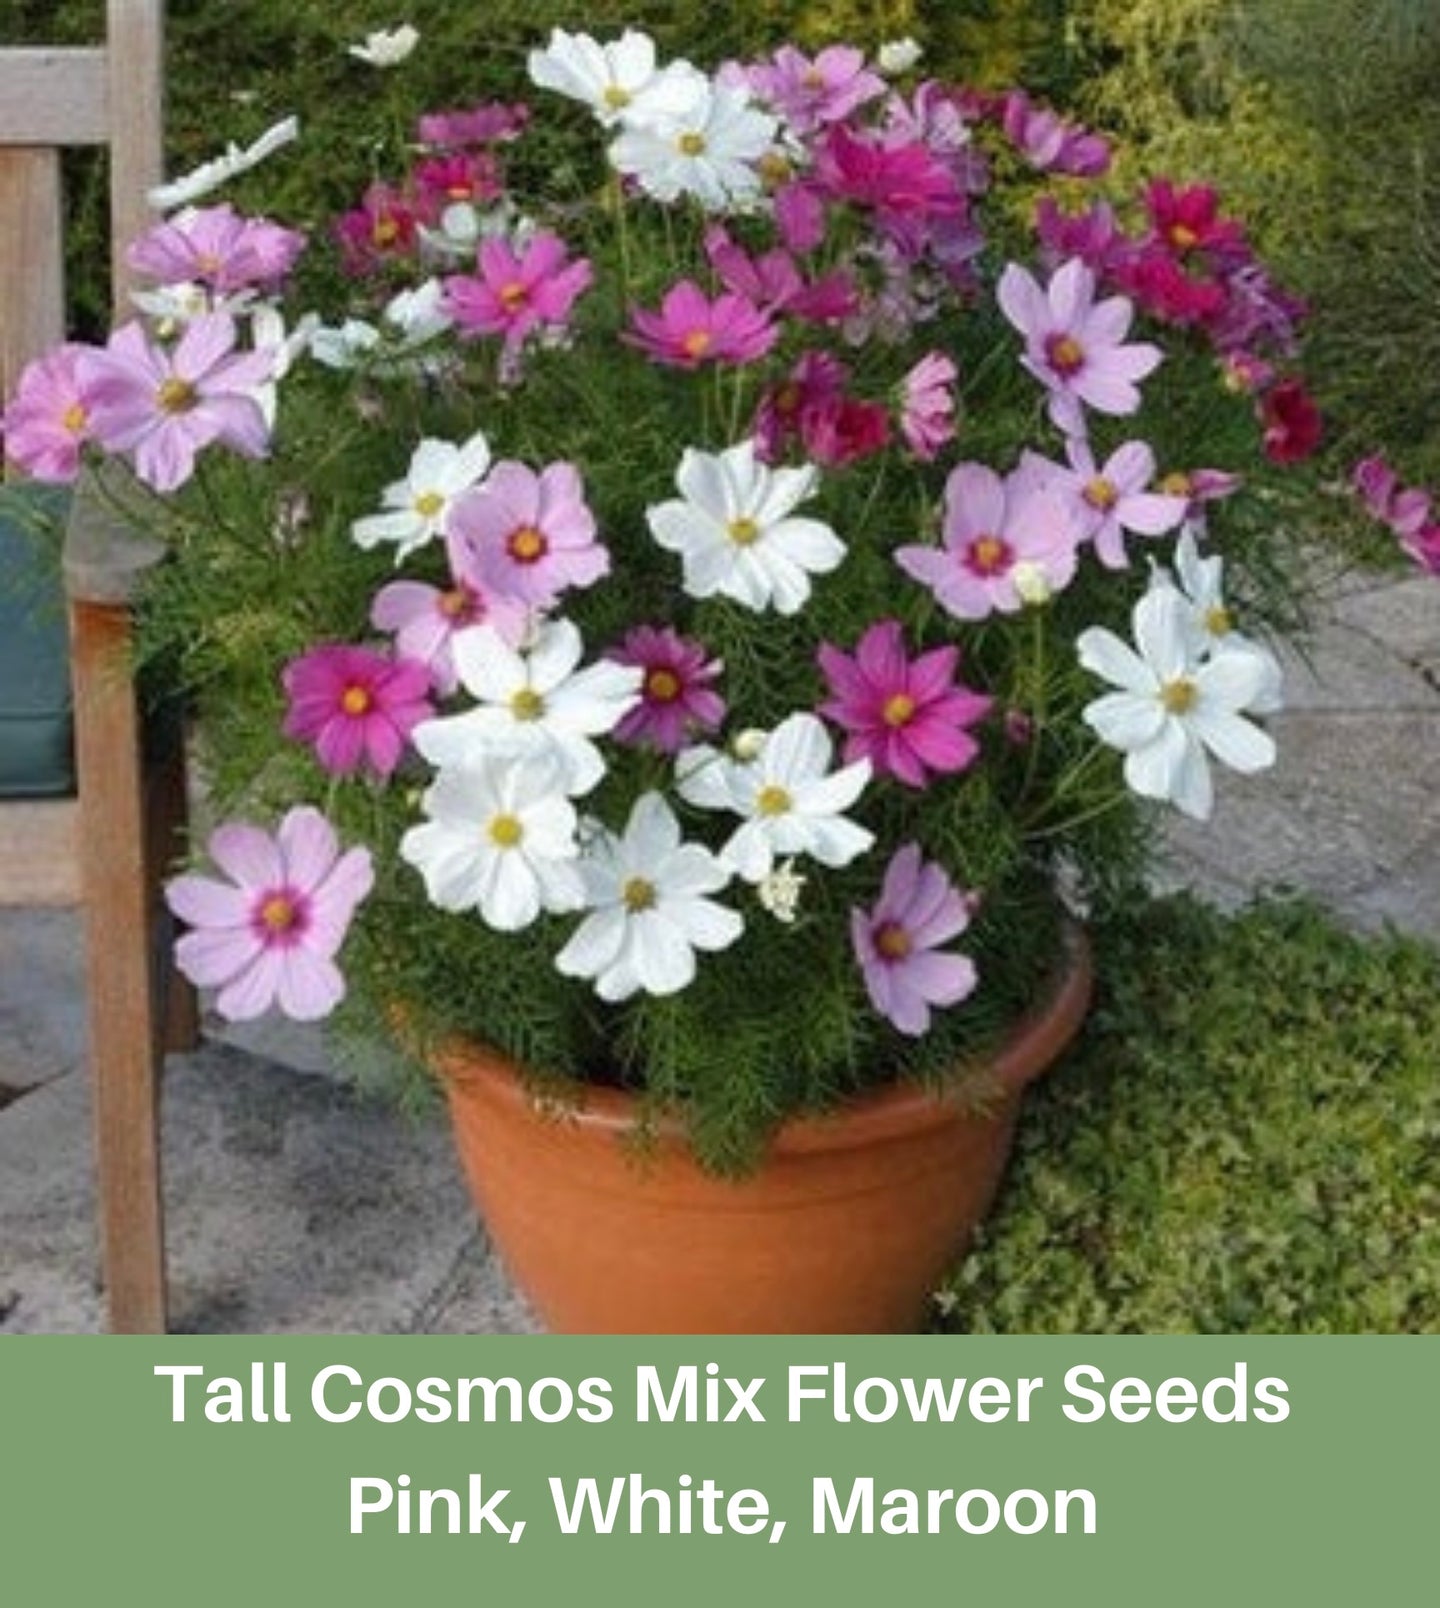 Tall Cosmos Mix Flower Seeds, Pink, White, Maroon